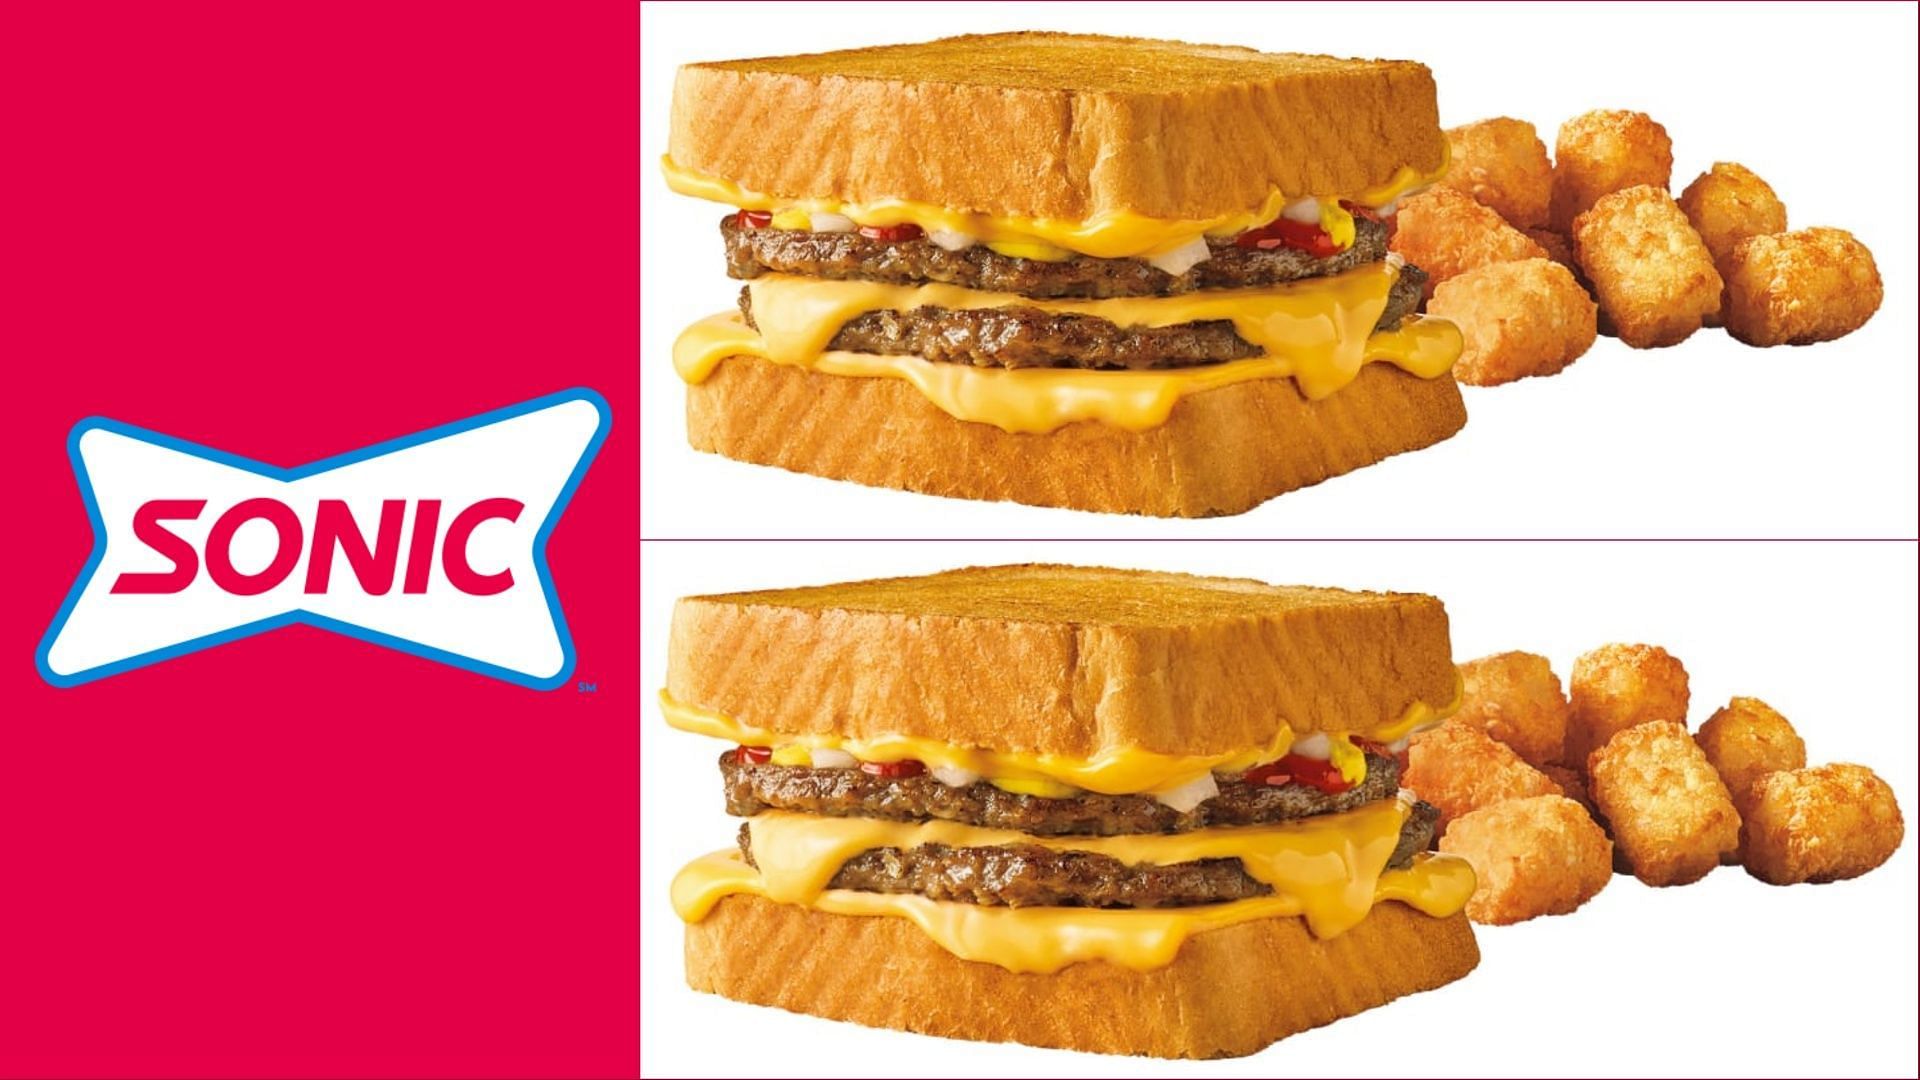 Sonic introduces new $3.99 Grilled Cheese Double Burger and Tots deal (Image via Sonic)